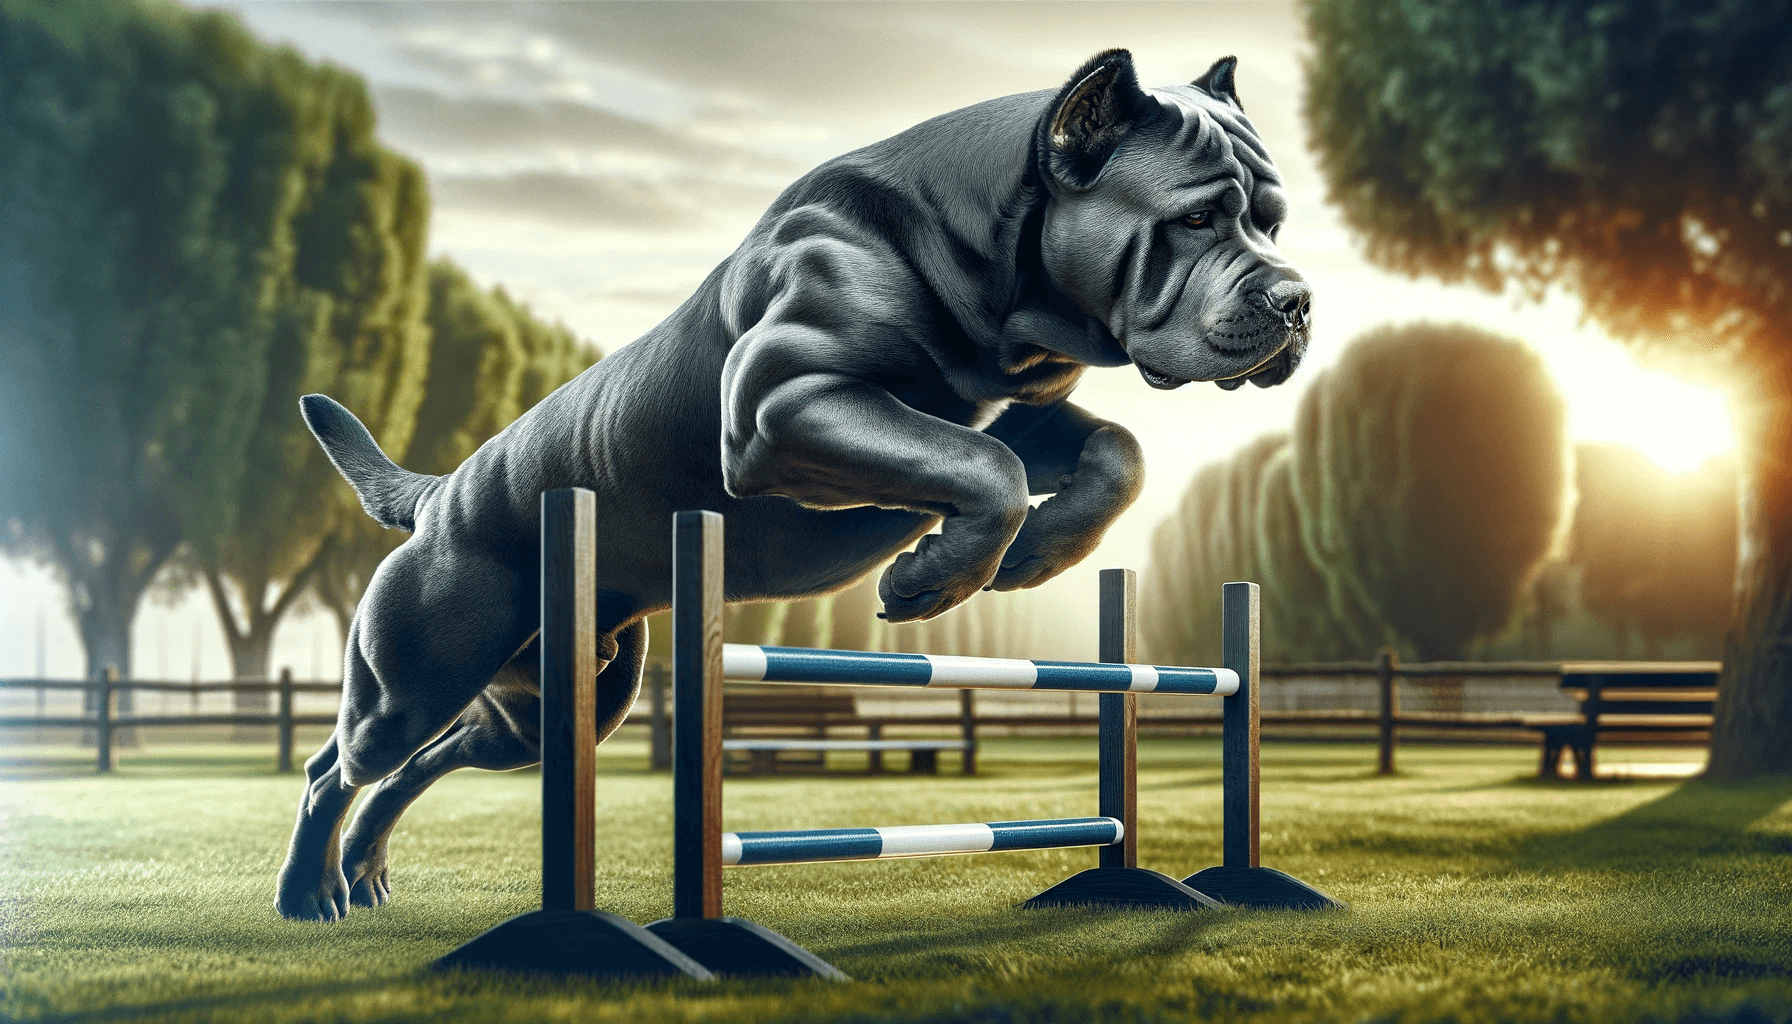 Blue Cane Corso Engaged in Training or Exercise